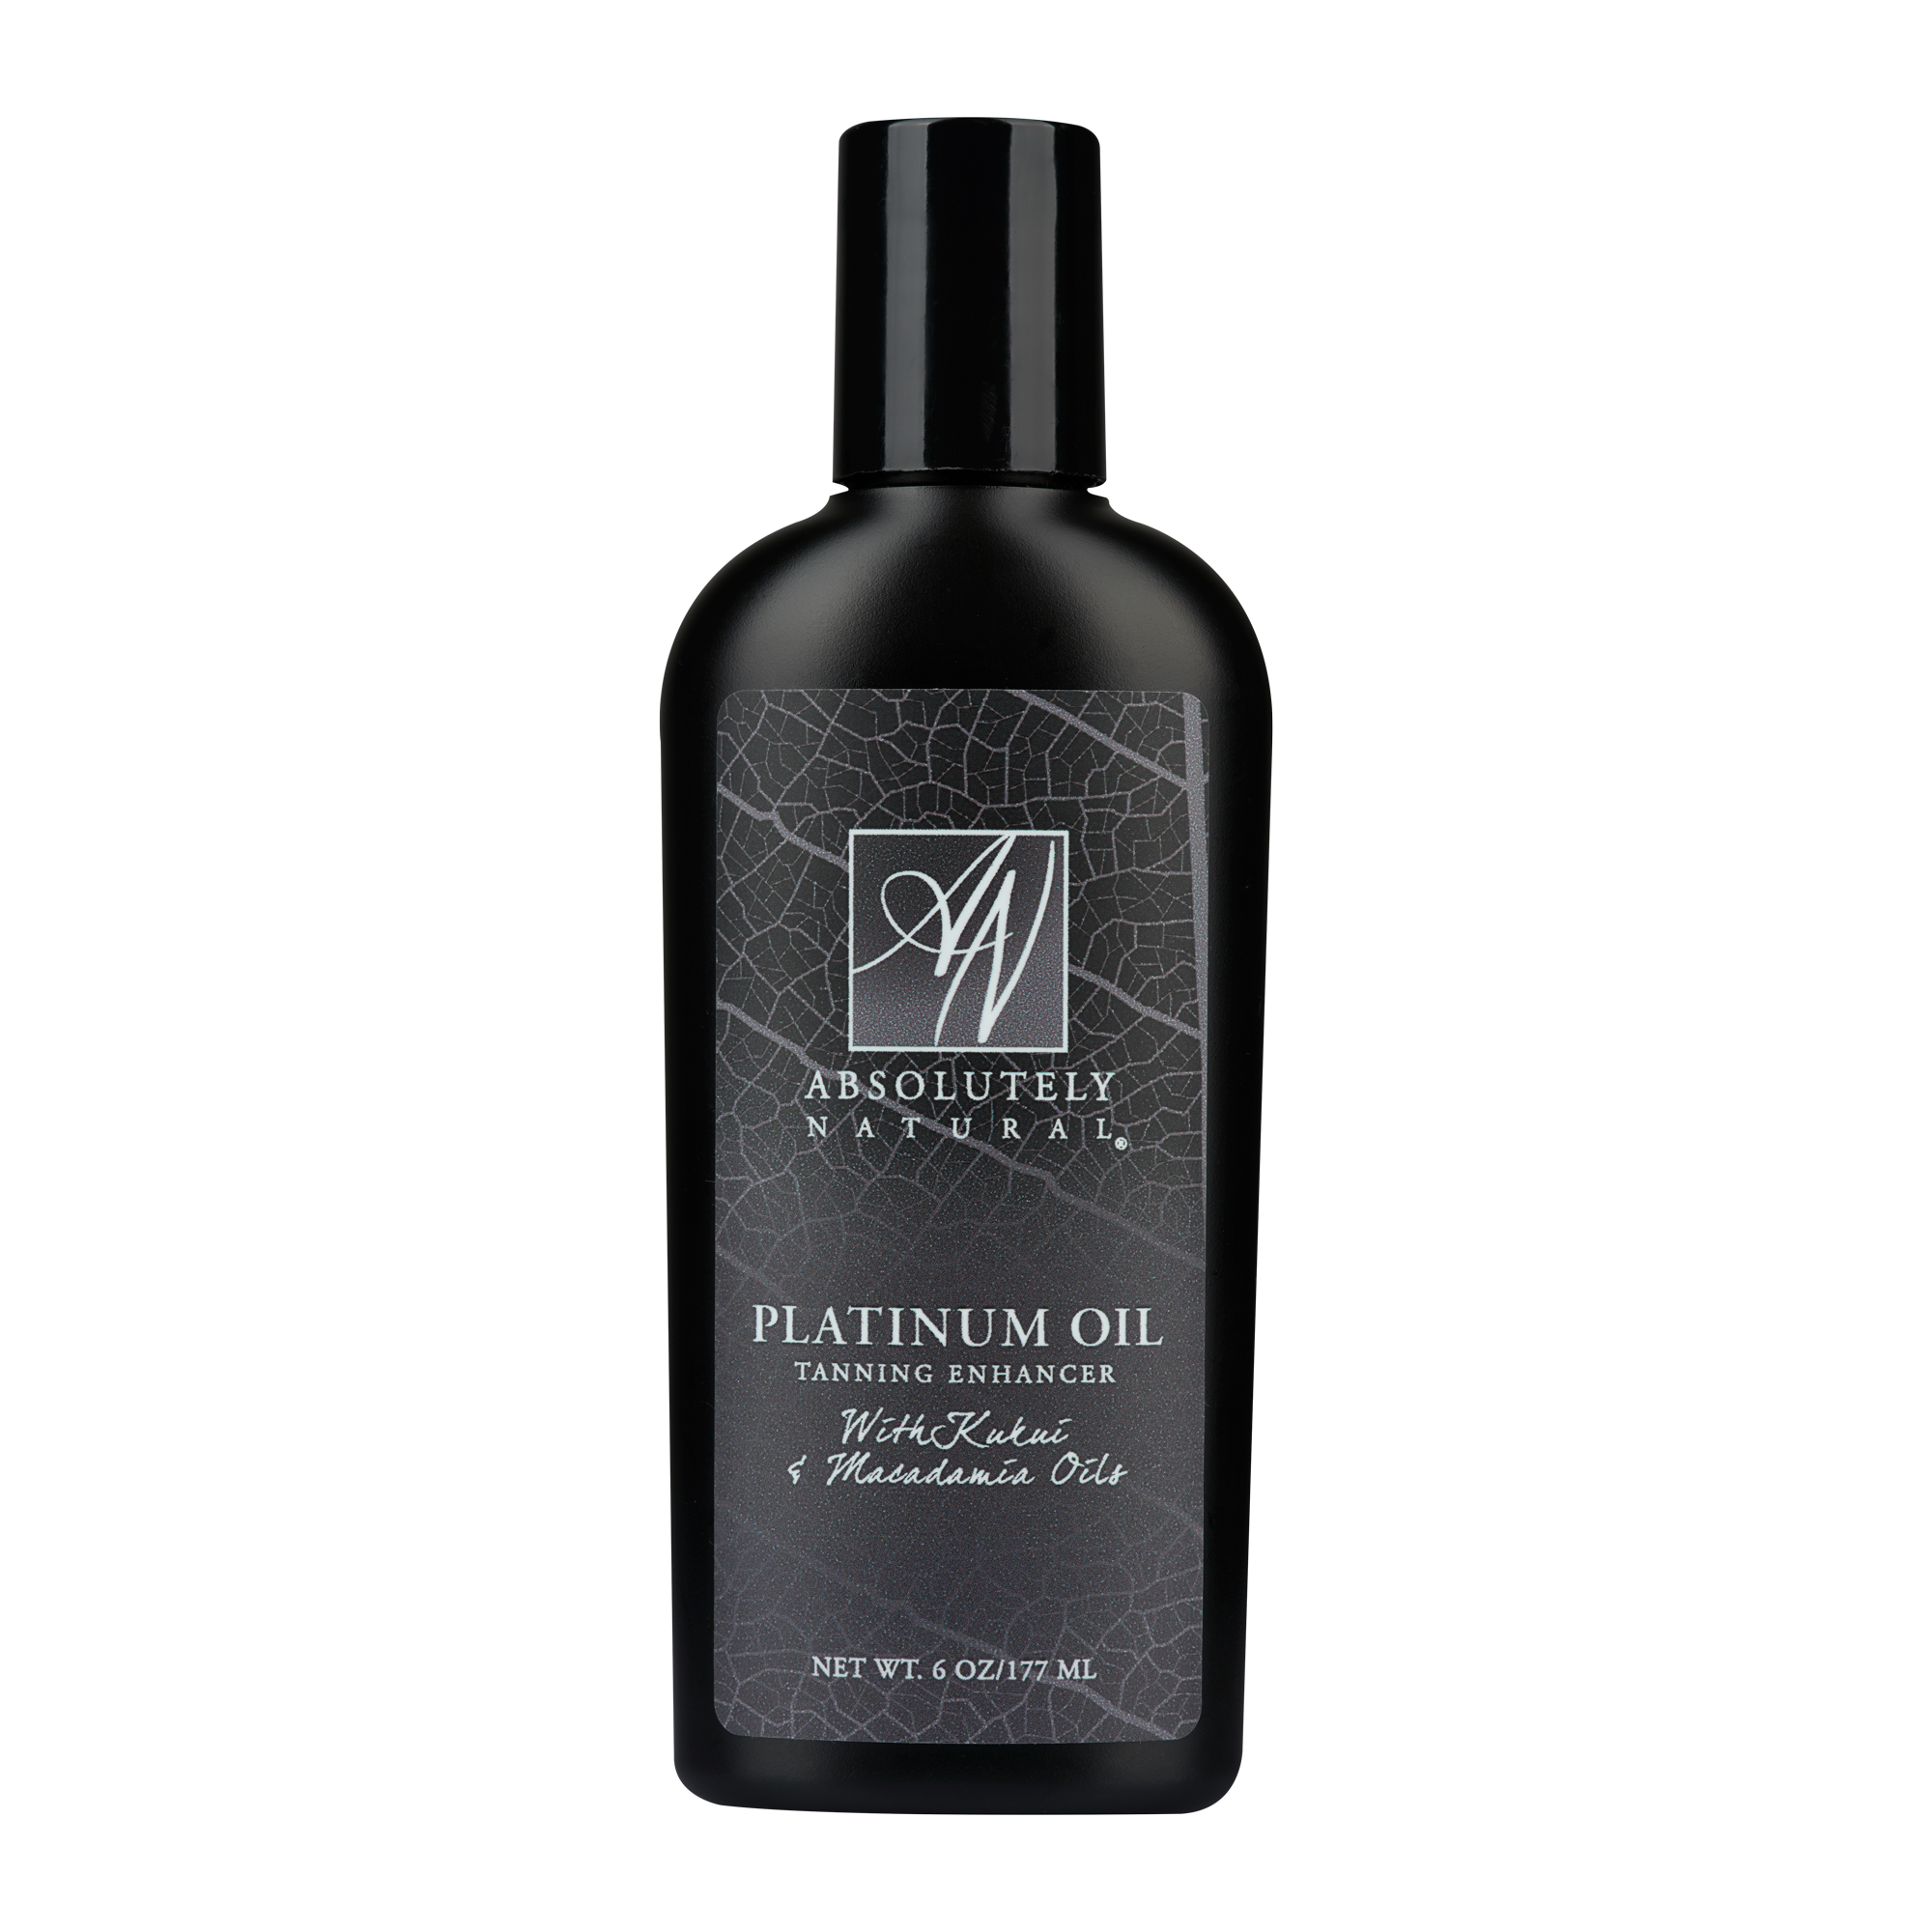 Absolutely Natural Platinum Tanning Oil